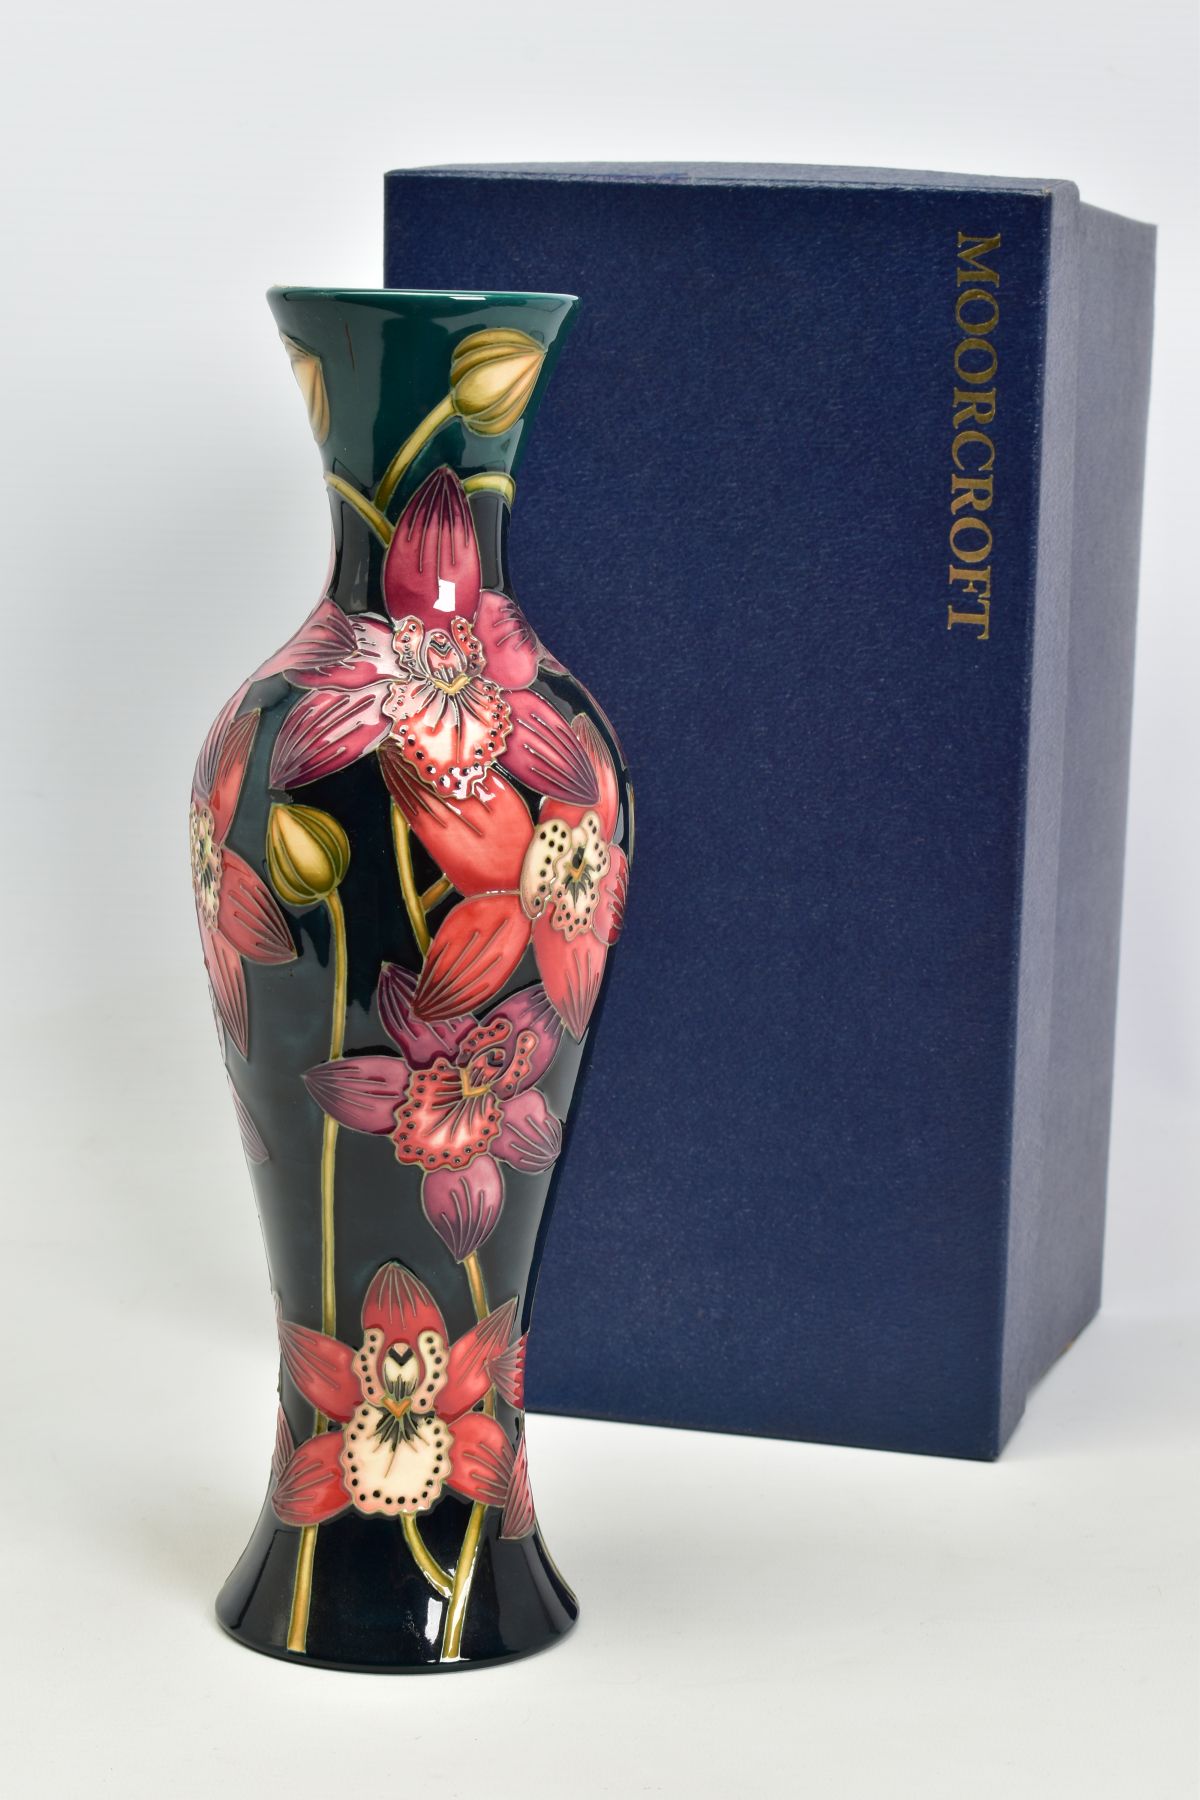 A BOXED MOORCROFT POTTERY VASE, from Connoisseur collection June 2004, 'Porelet Bay', pink and red